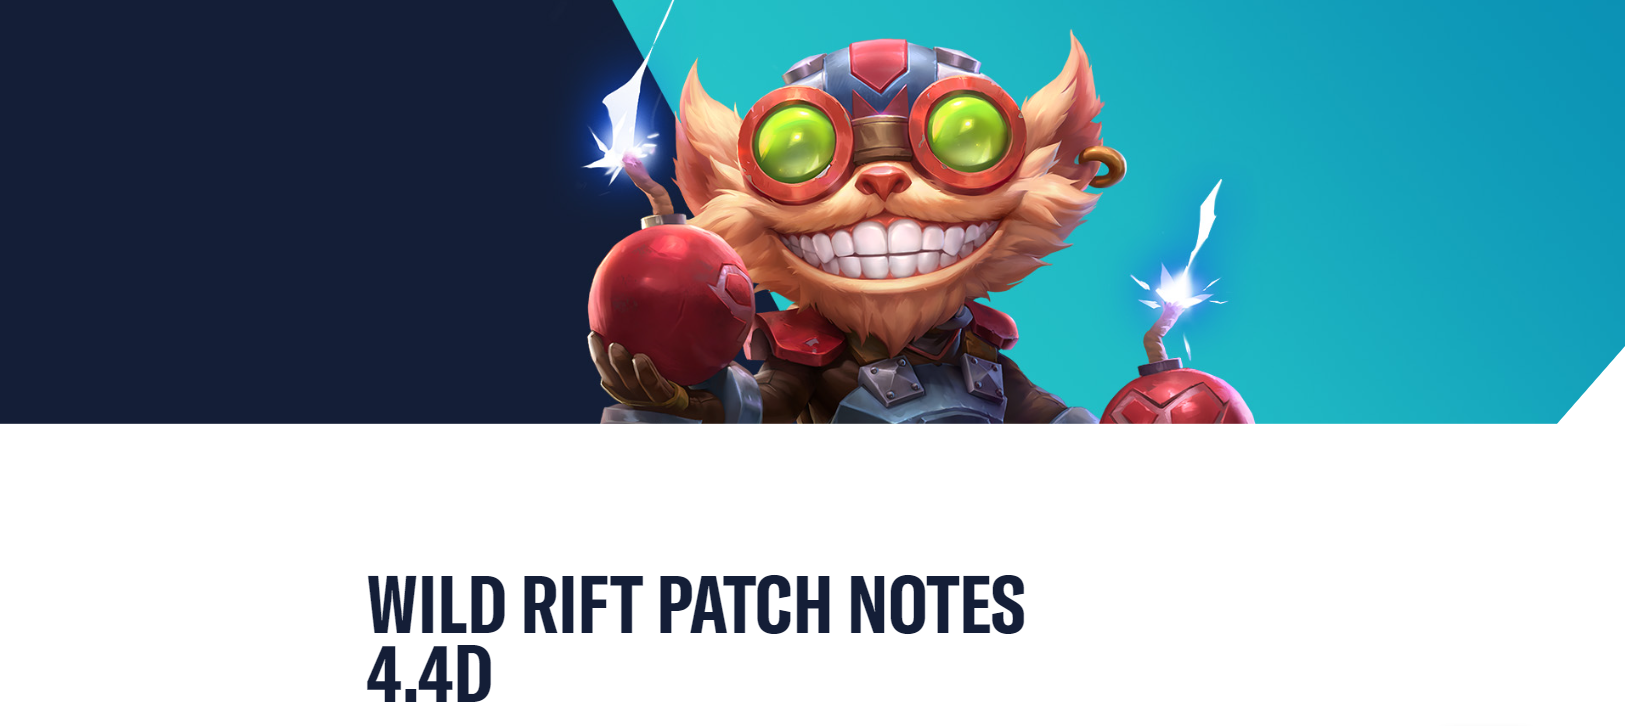 wild rift patch notes